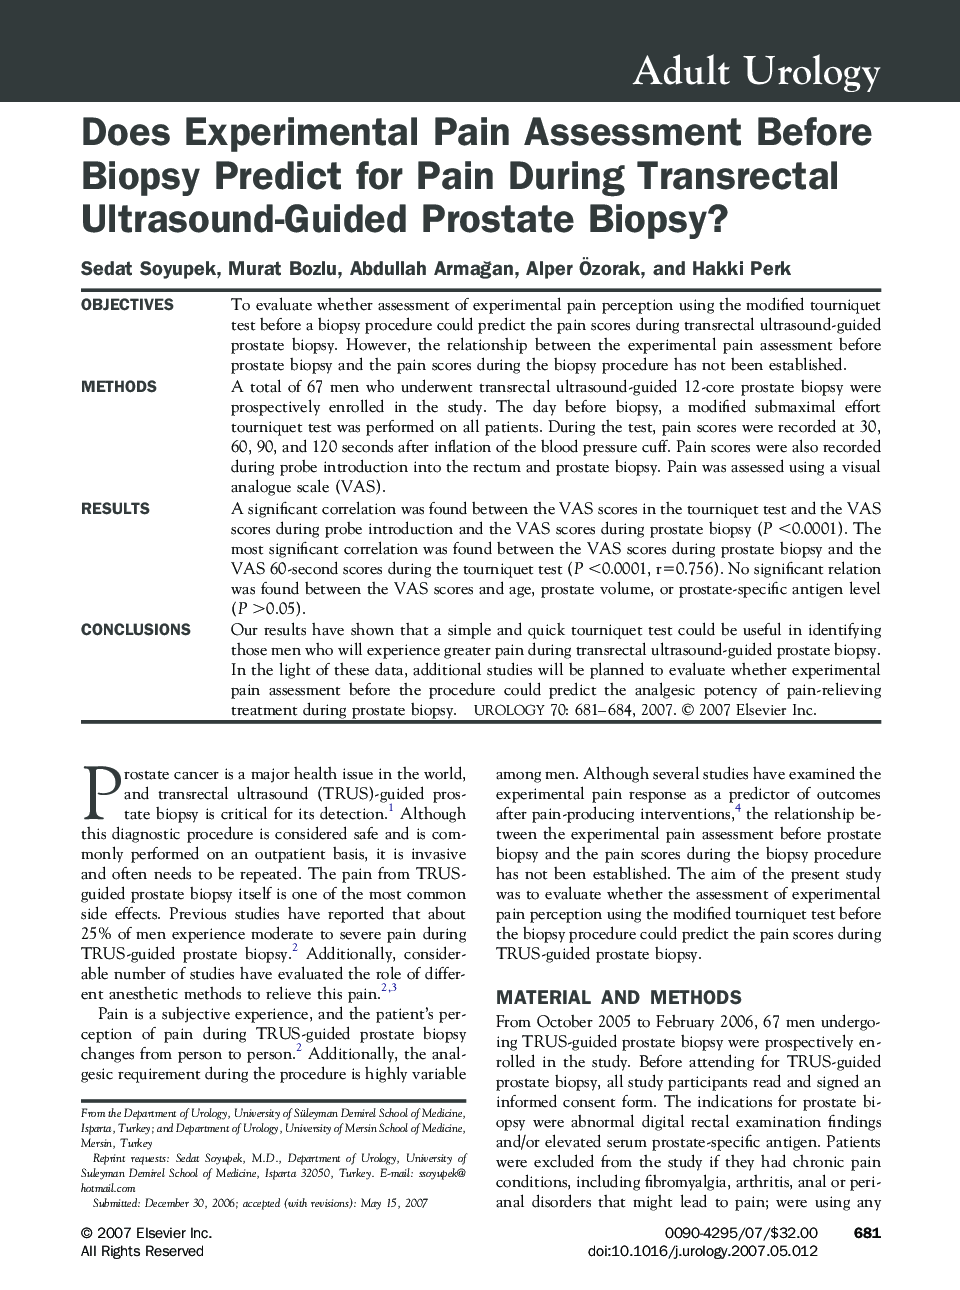 Does Experimental Pain Assessment Before Biopsy Predict for Pain During Transrectal Ultrasound-Guided Prostate Biopsy?